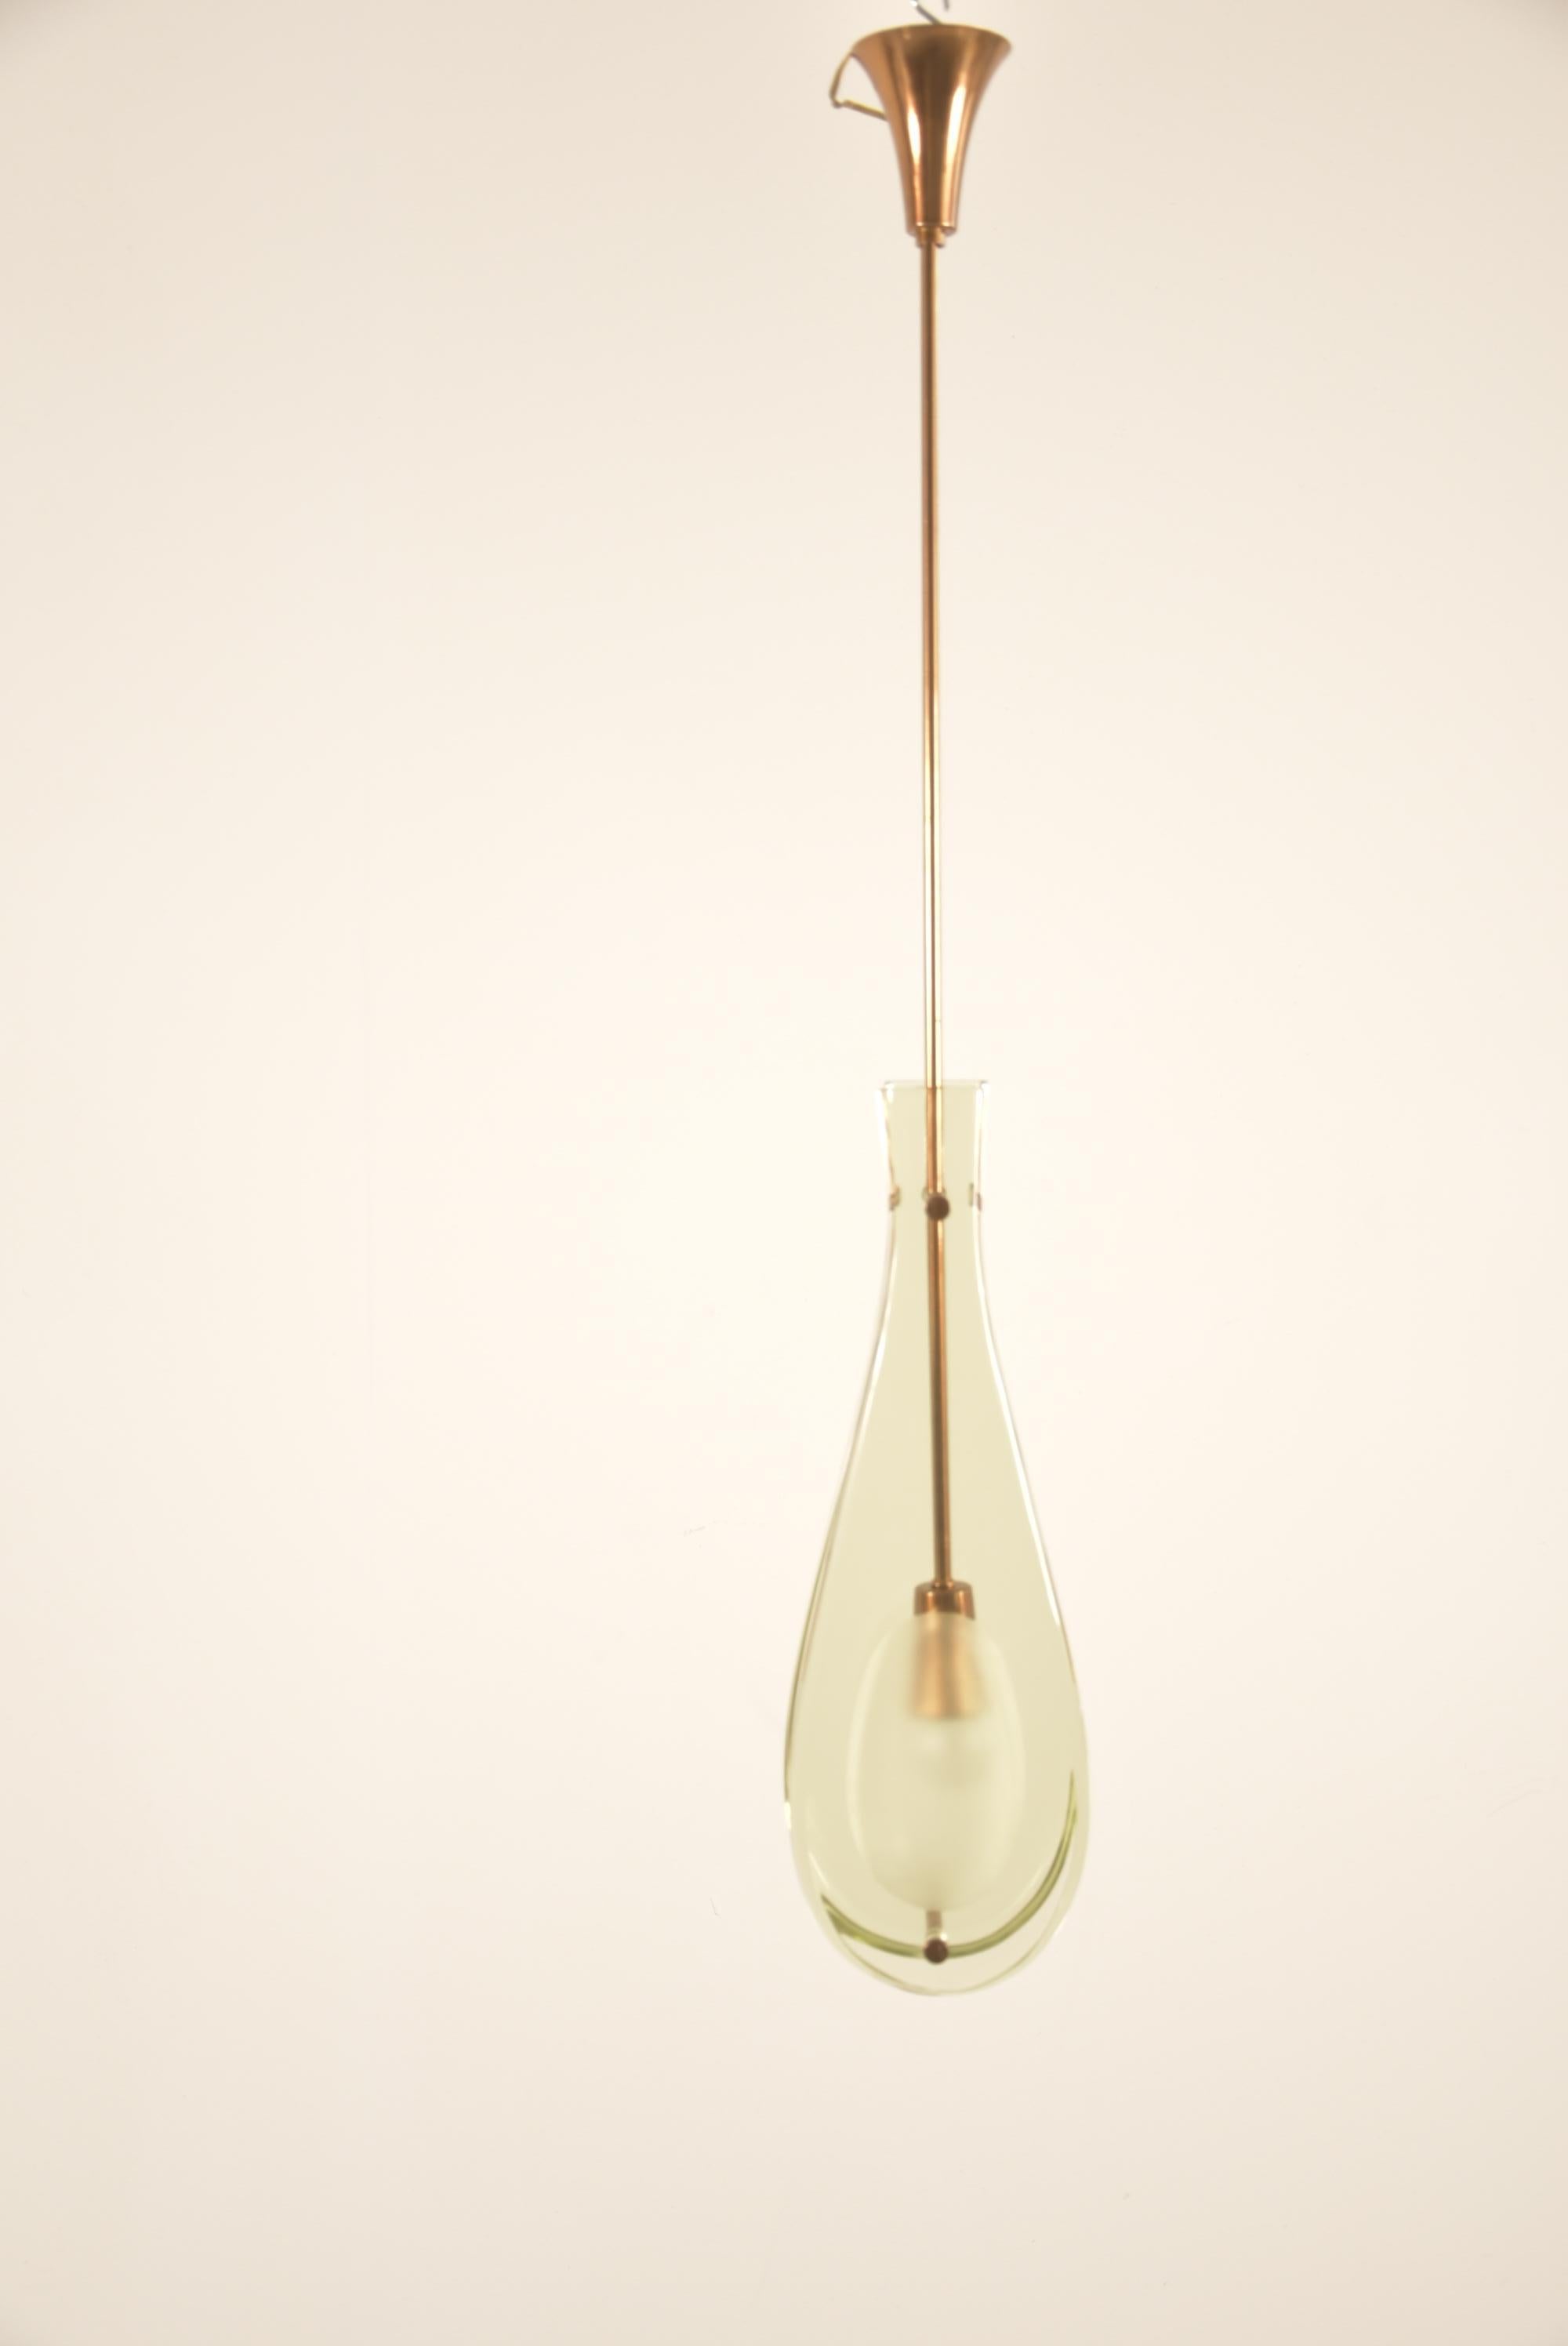 Classic Max Ingrand drop-shaped pendant model 2259 for Fontana Arte, 1960s. Thick partially frosted glass on Minimalist patinated brass hardware.